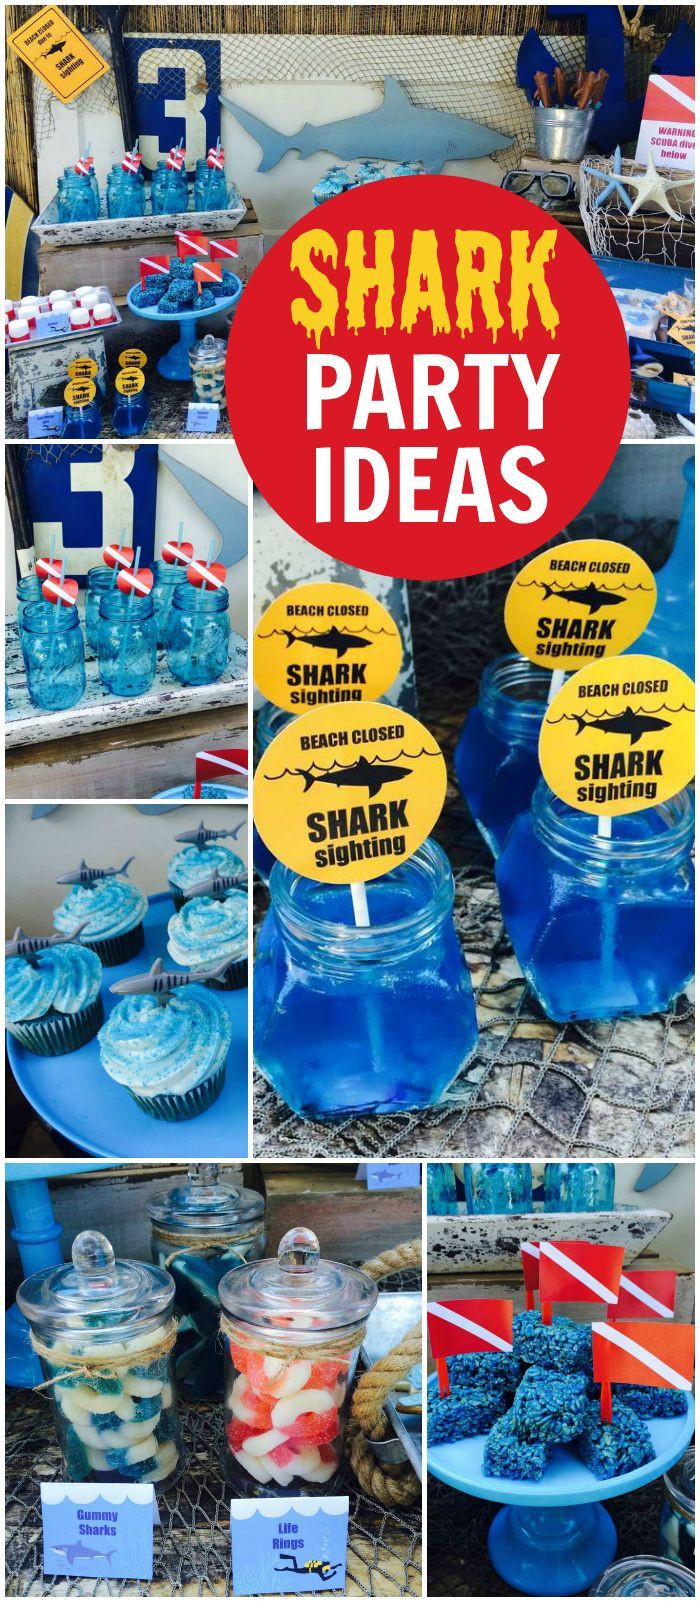 1St Birthday Pool Party Ideas
 This shark theme is perfect for a pool party See more